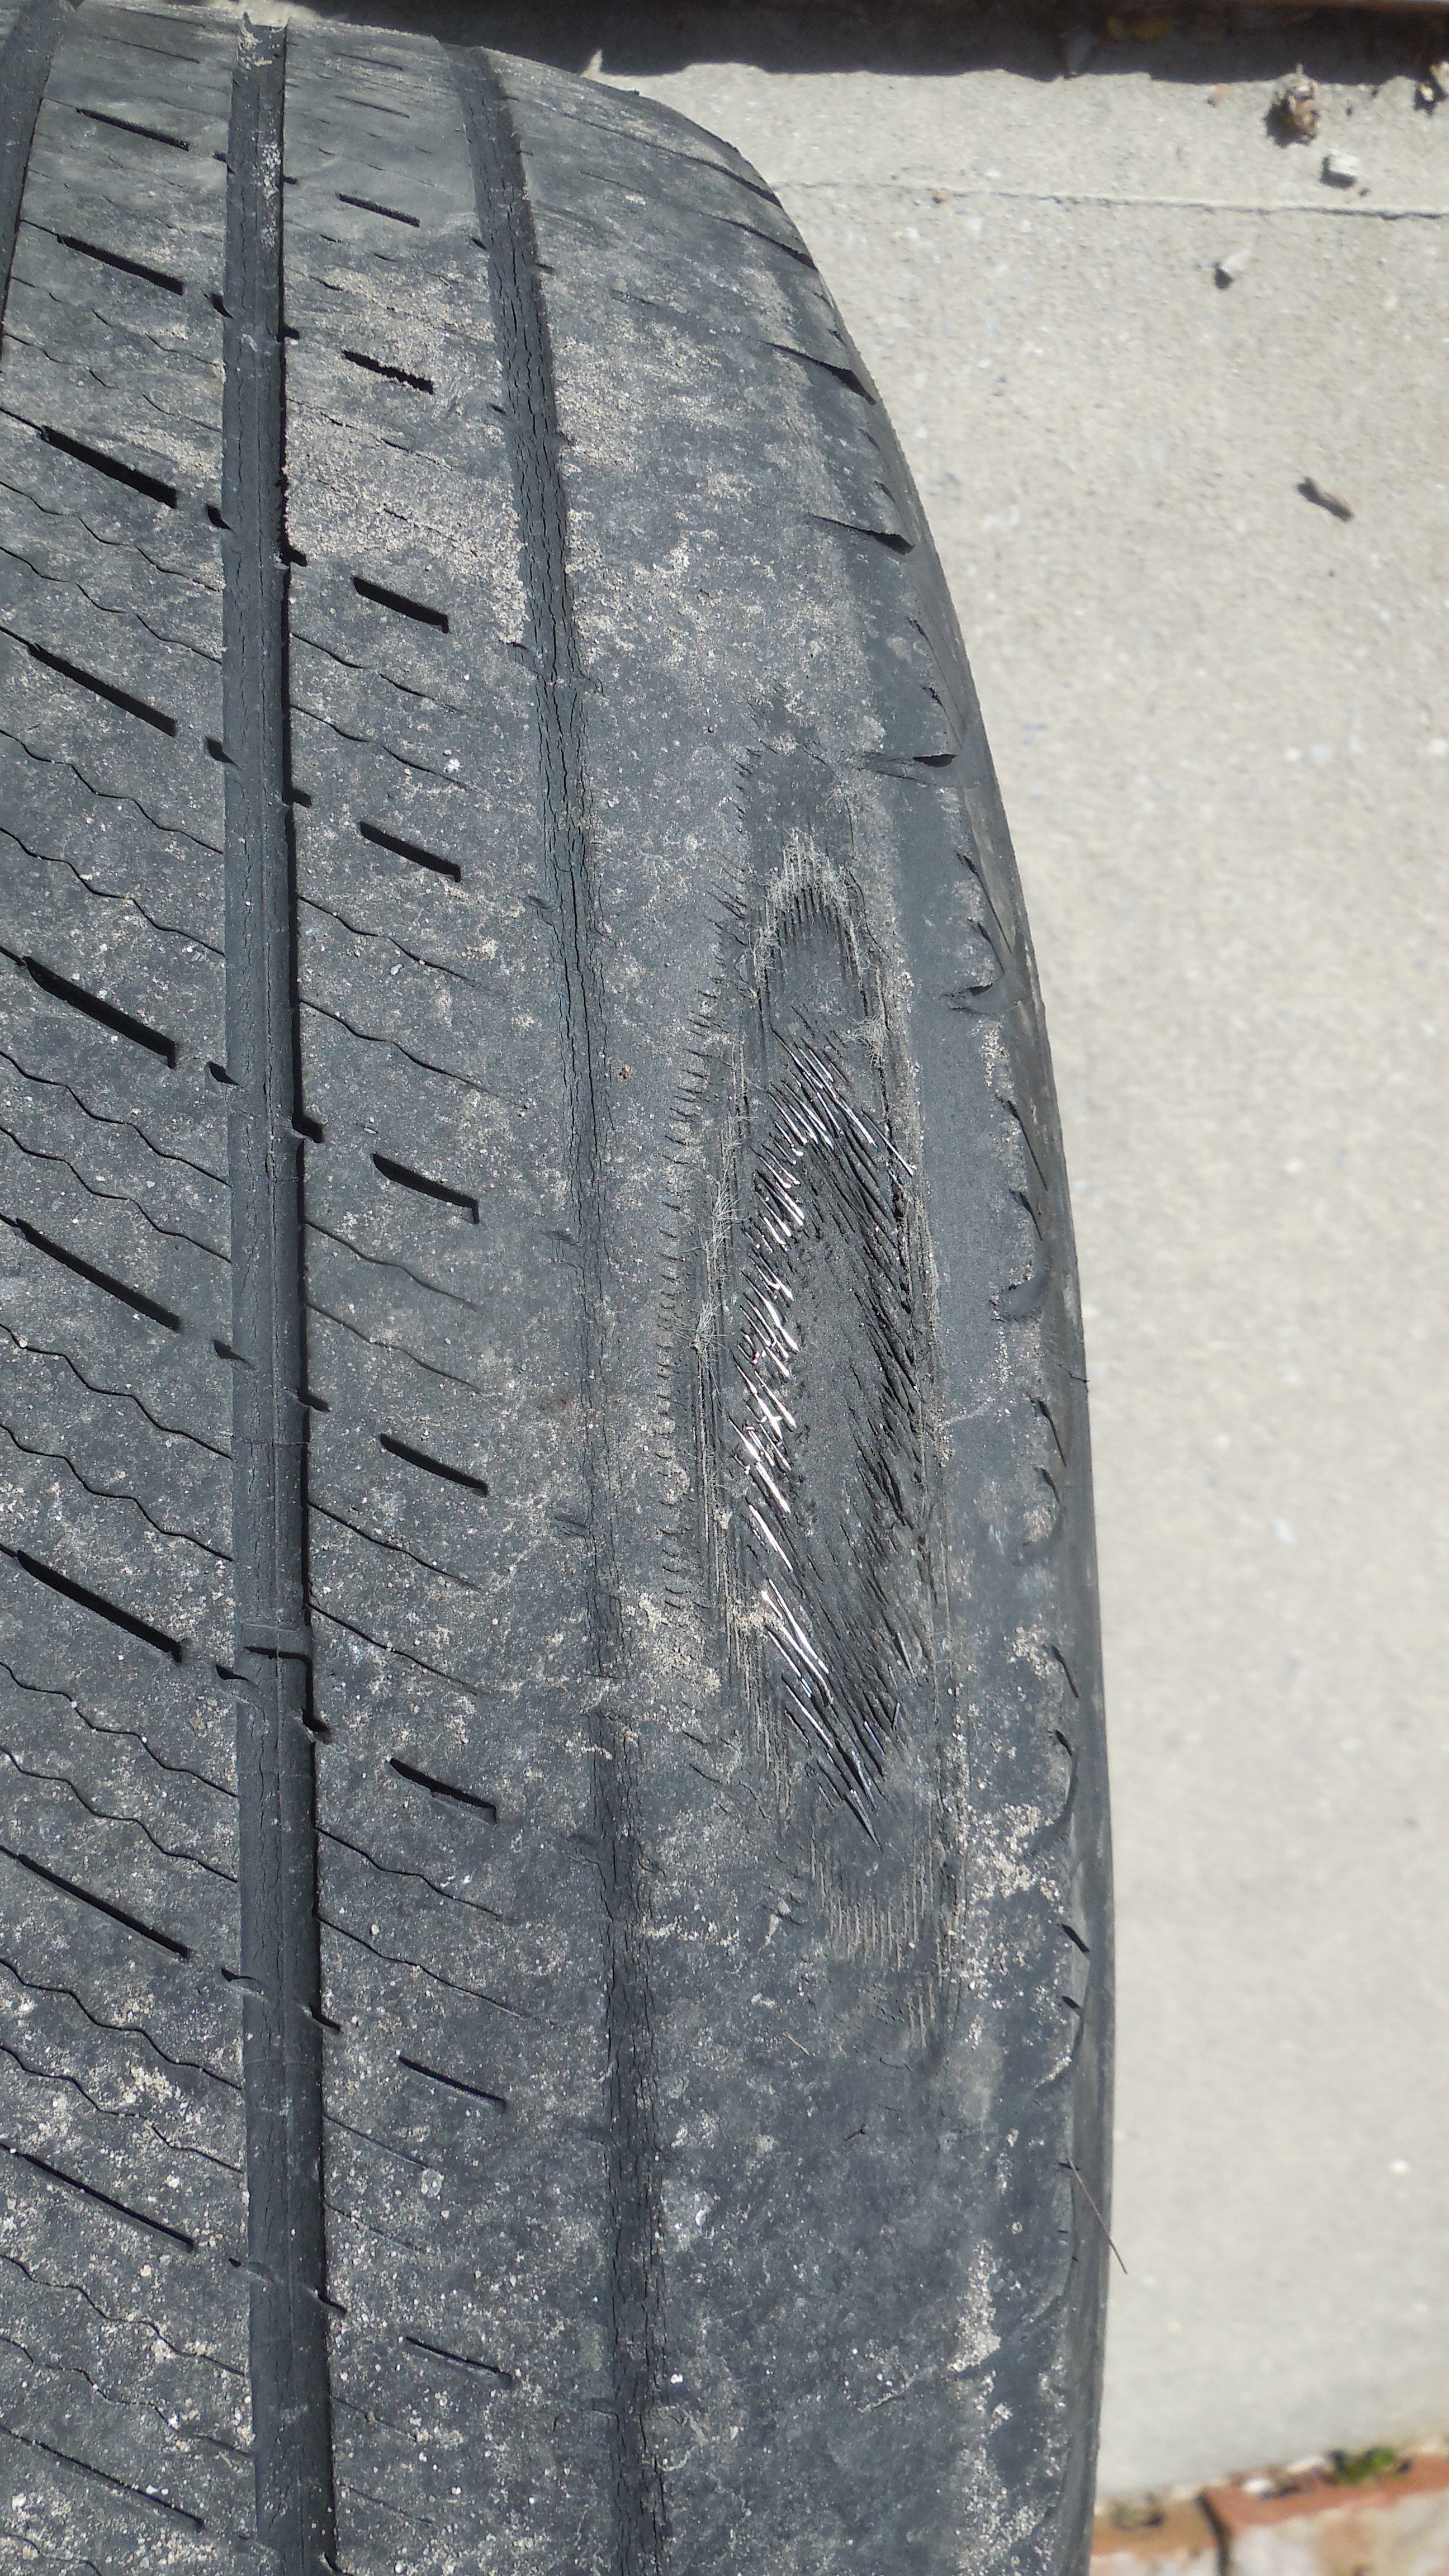 What are some reliable sources for buying used wheels and tires?